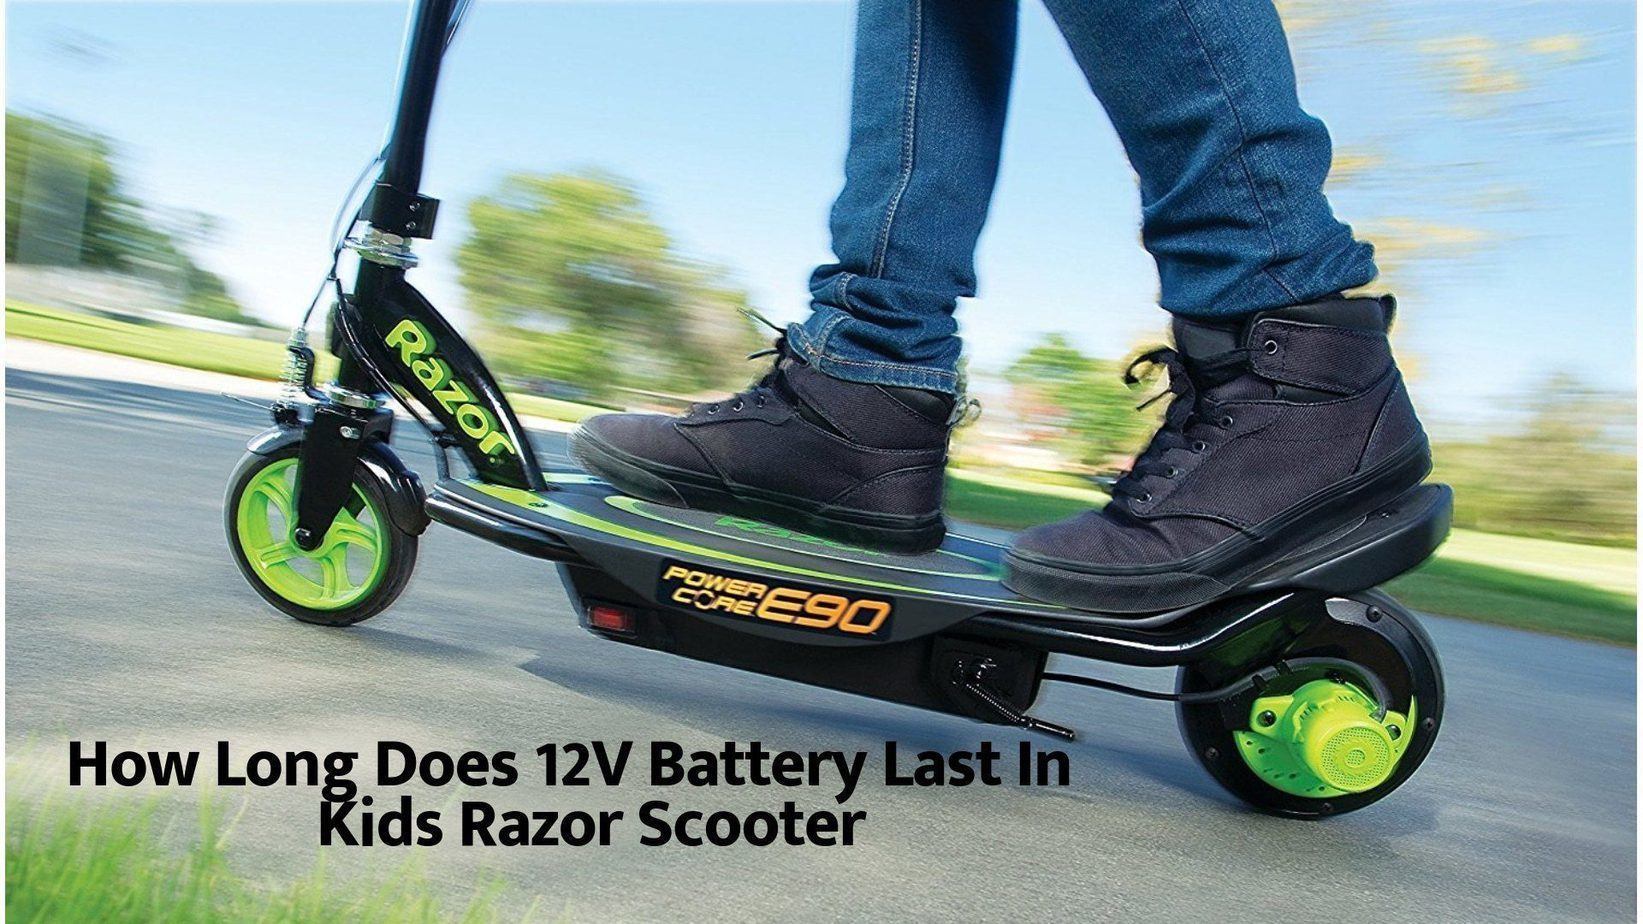 How Long Does 12V Battery Last In Kids Razor Scooter